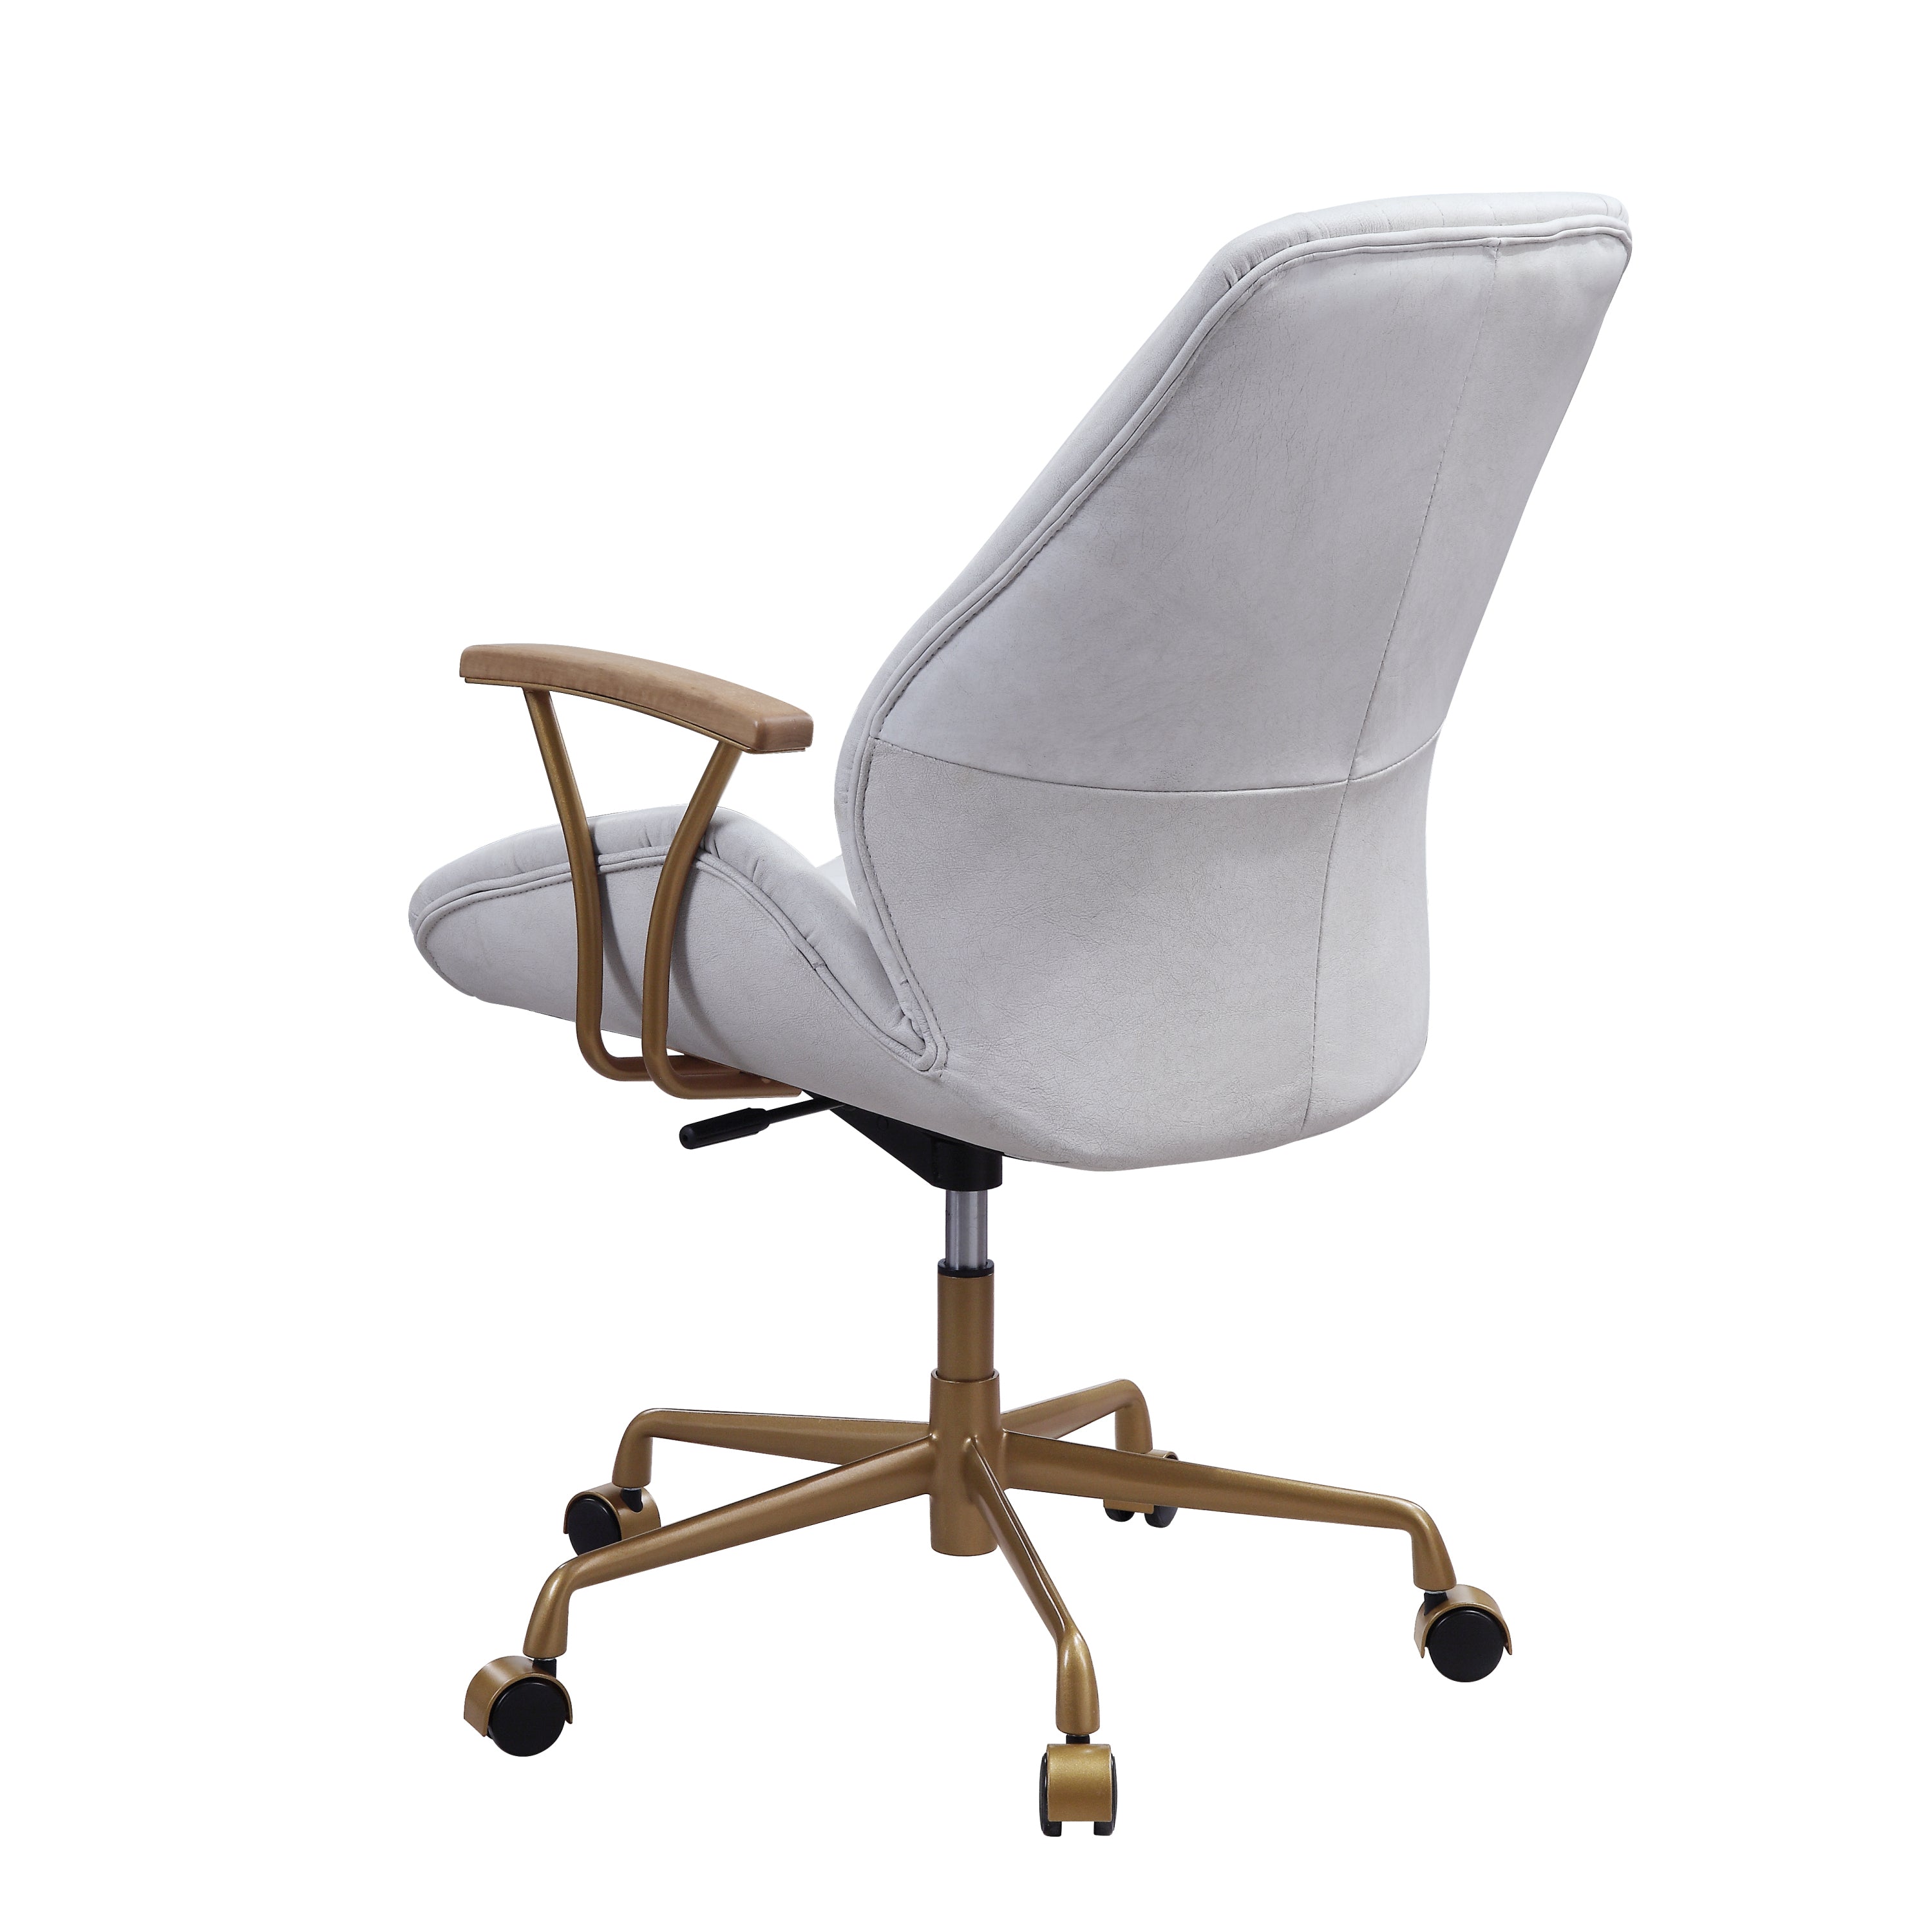 Office Chair in Vintage - White Finish